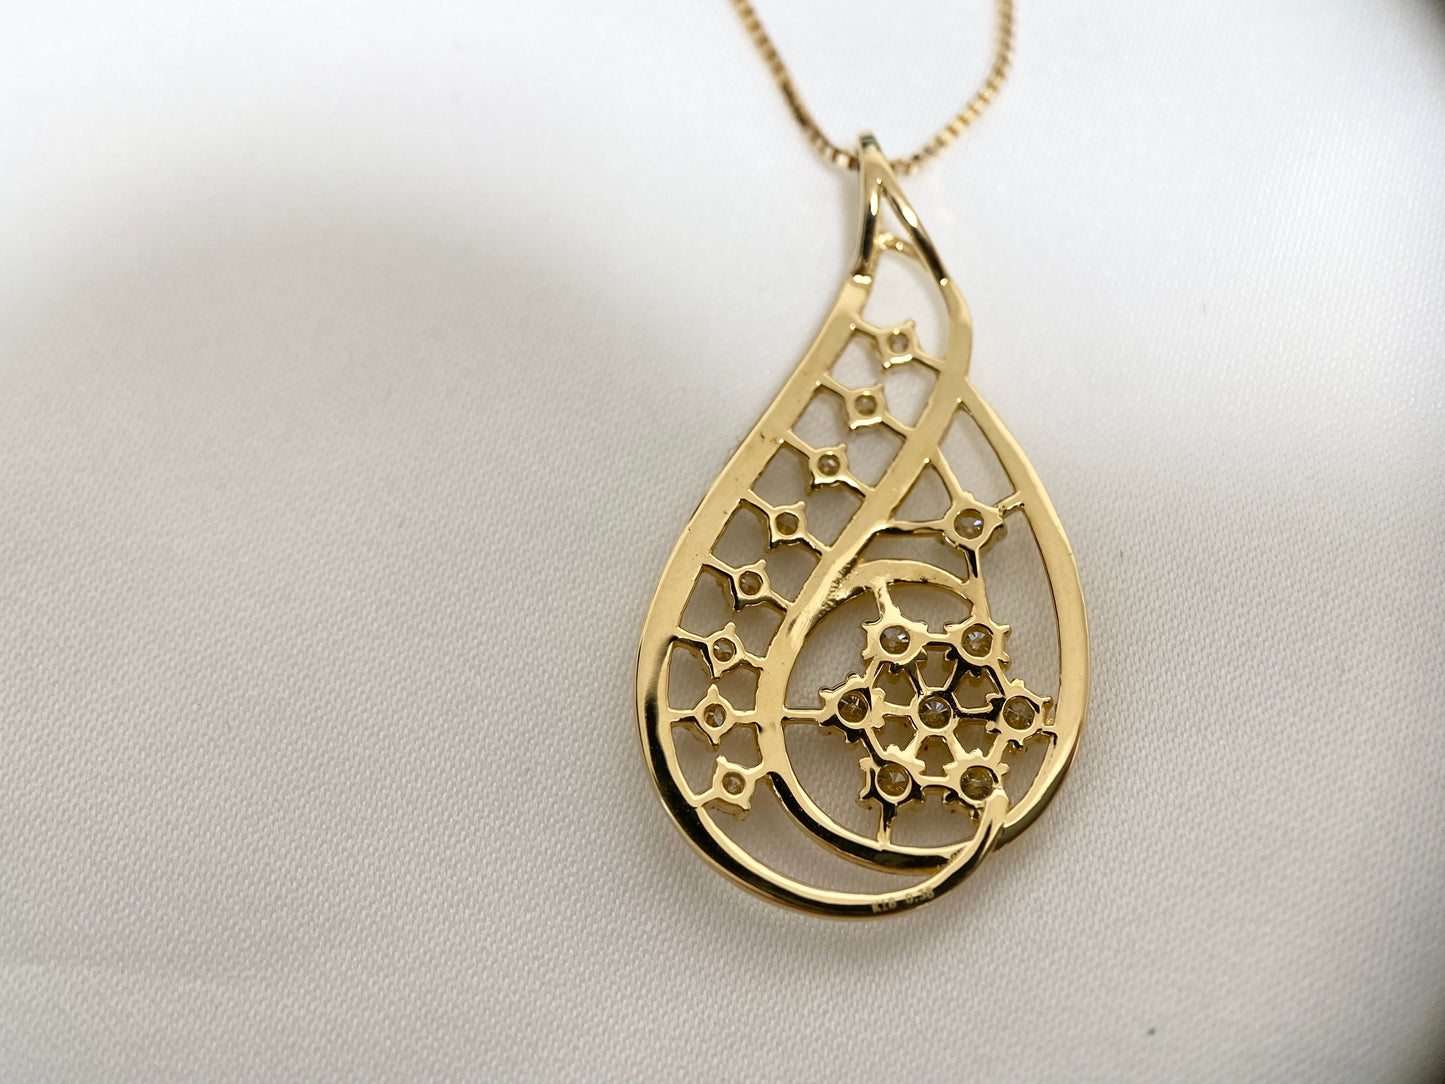 New] Luxurious diamond jewelry necklace conceived from penny farthings.